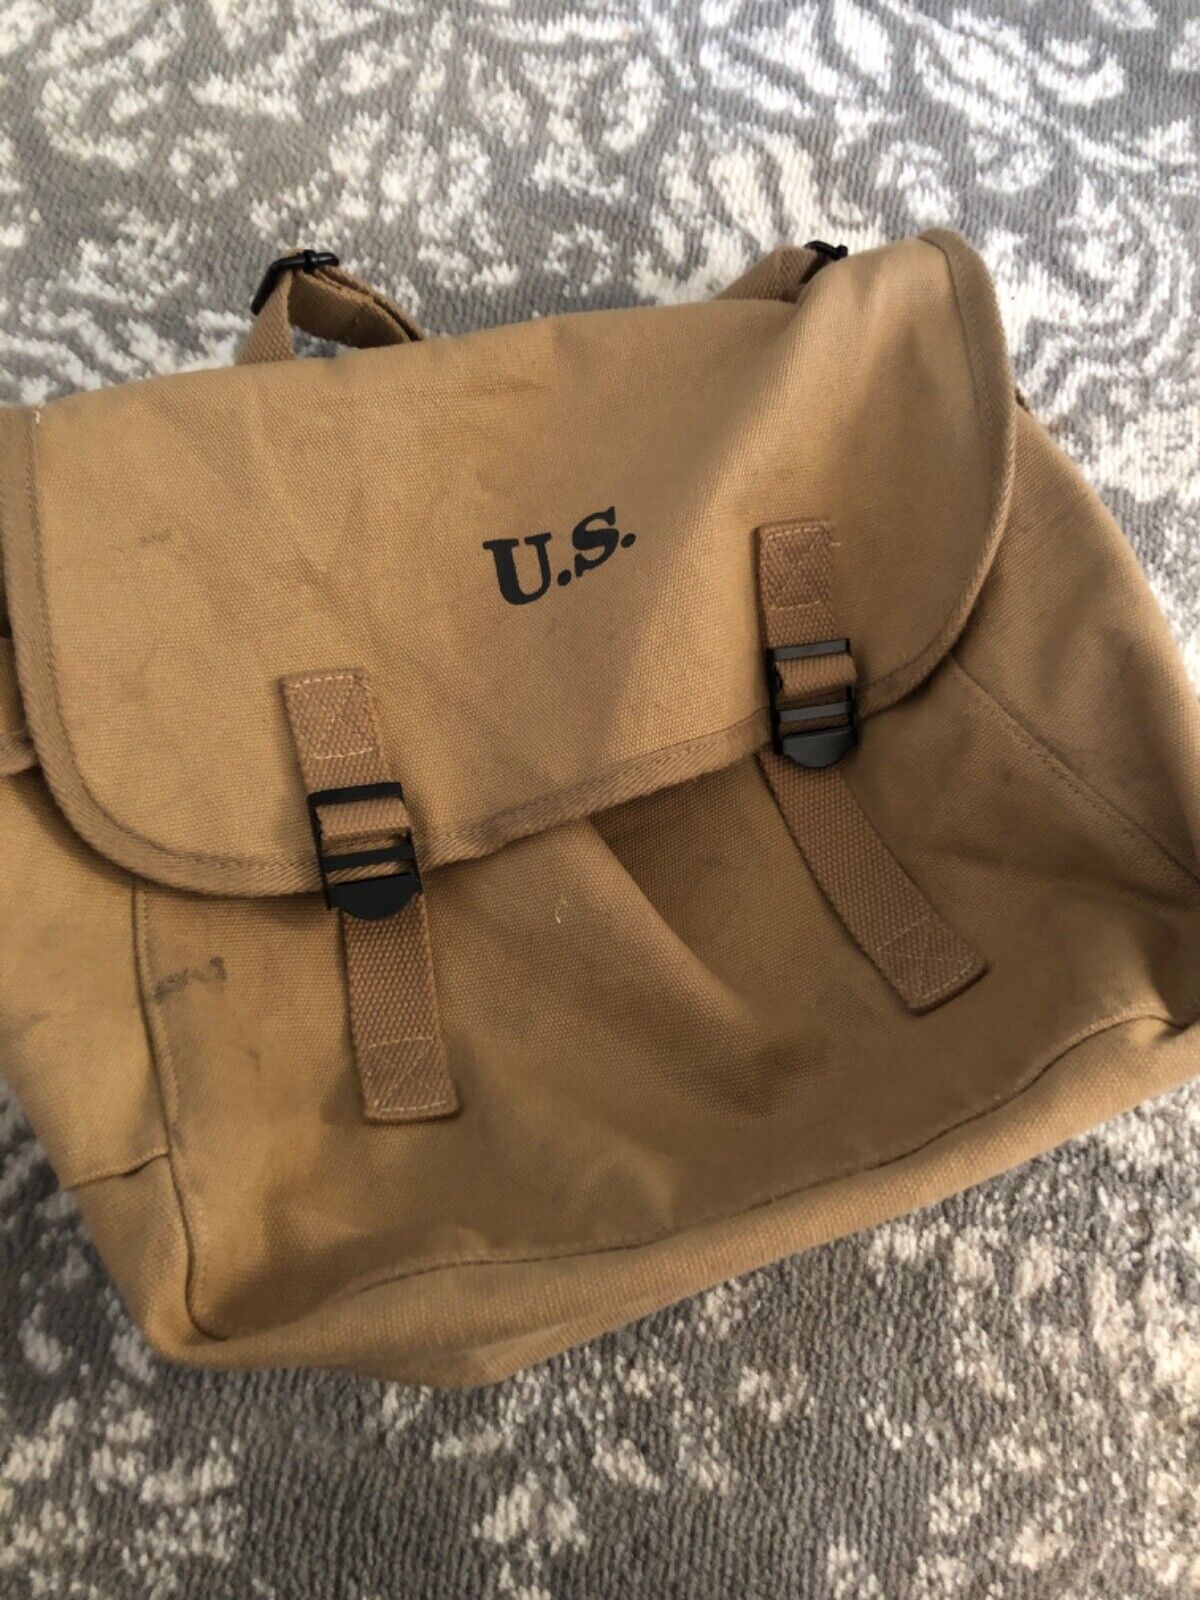 WWII US musette bag